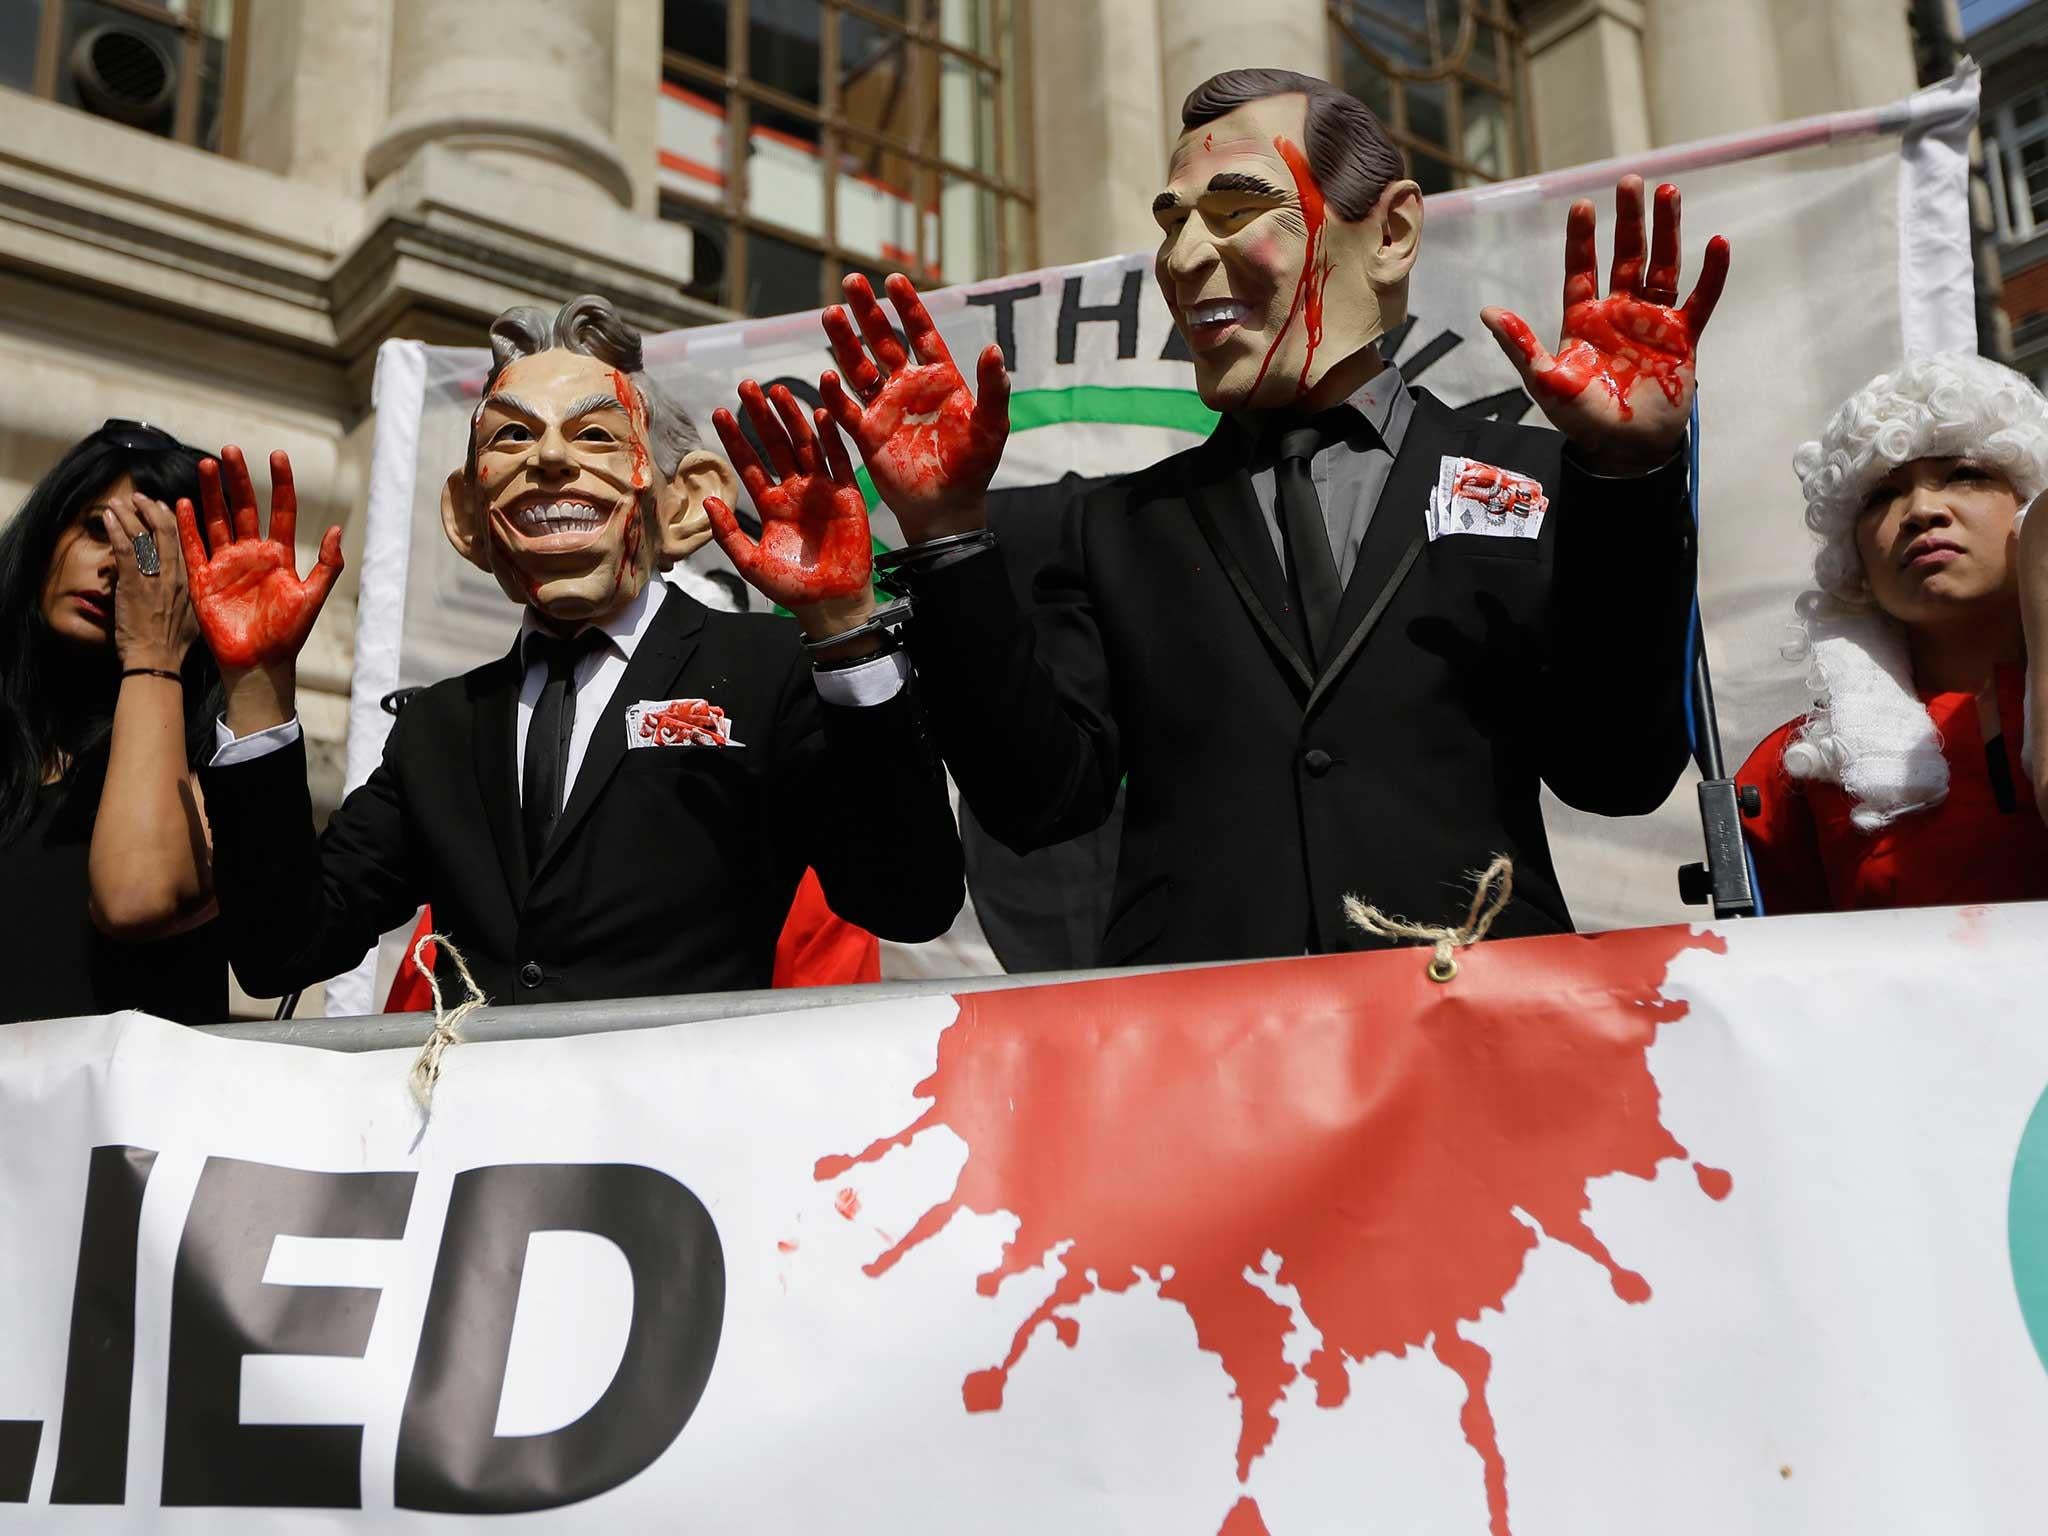 Protesters wearing a former British Prime Minister Tony Blair mask and former U.S. President George W. Bush